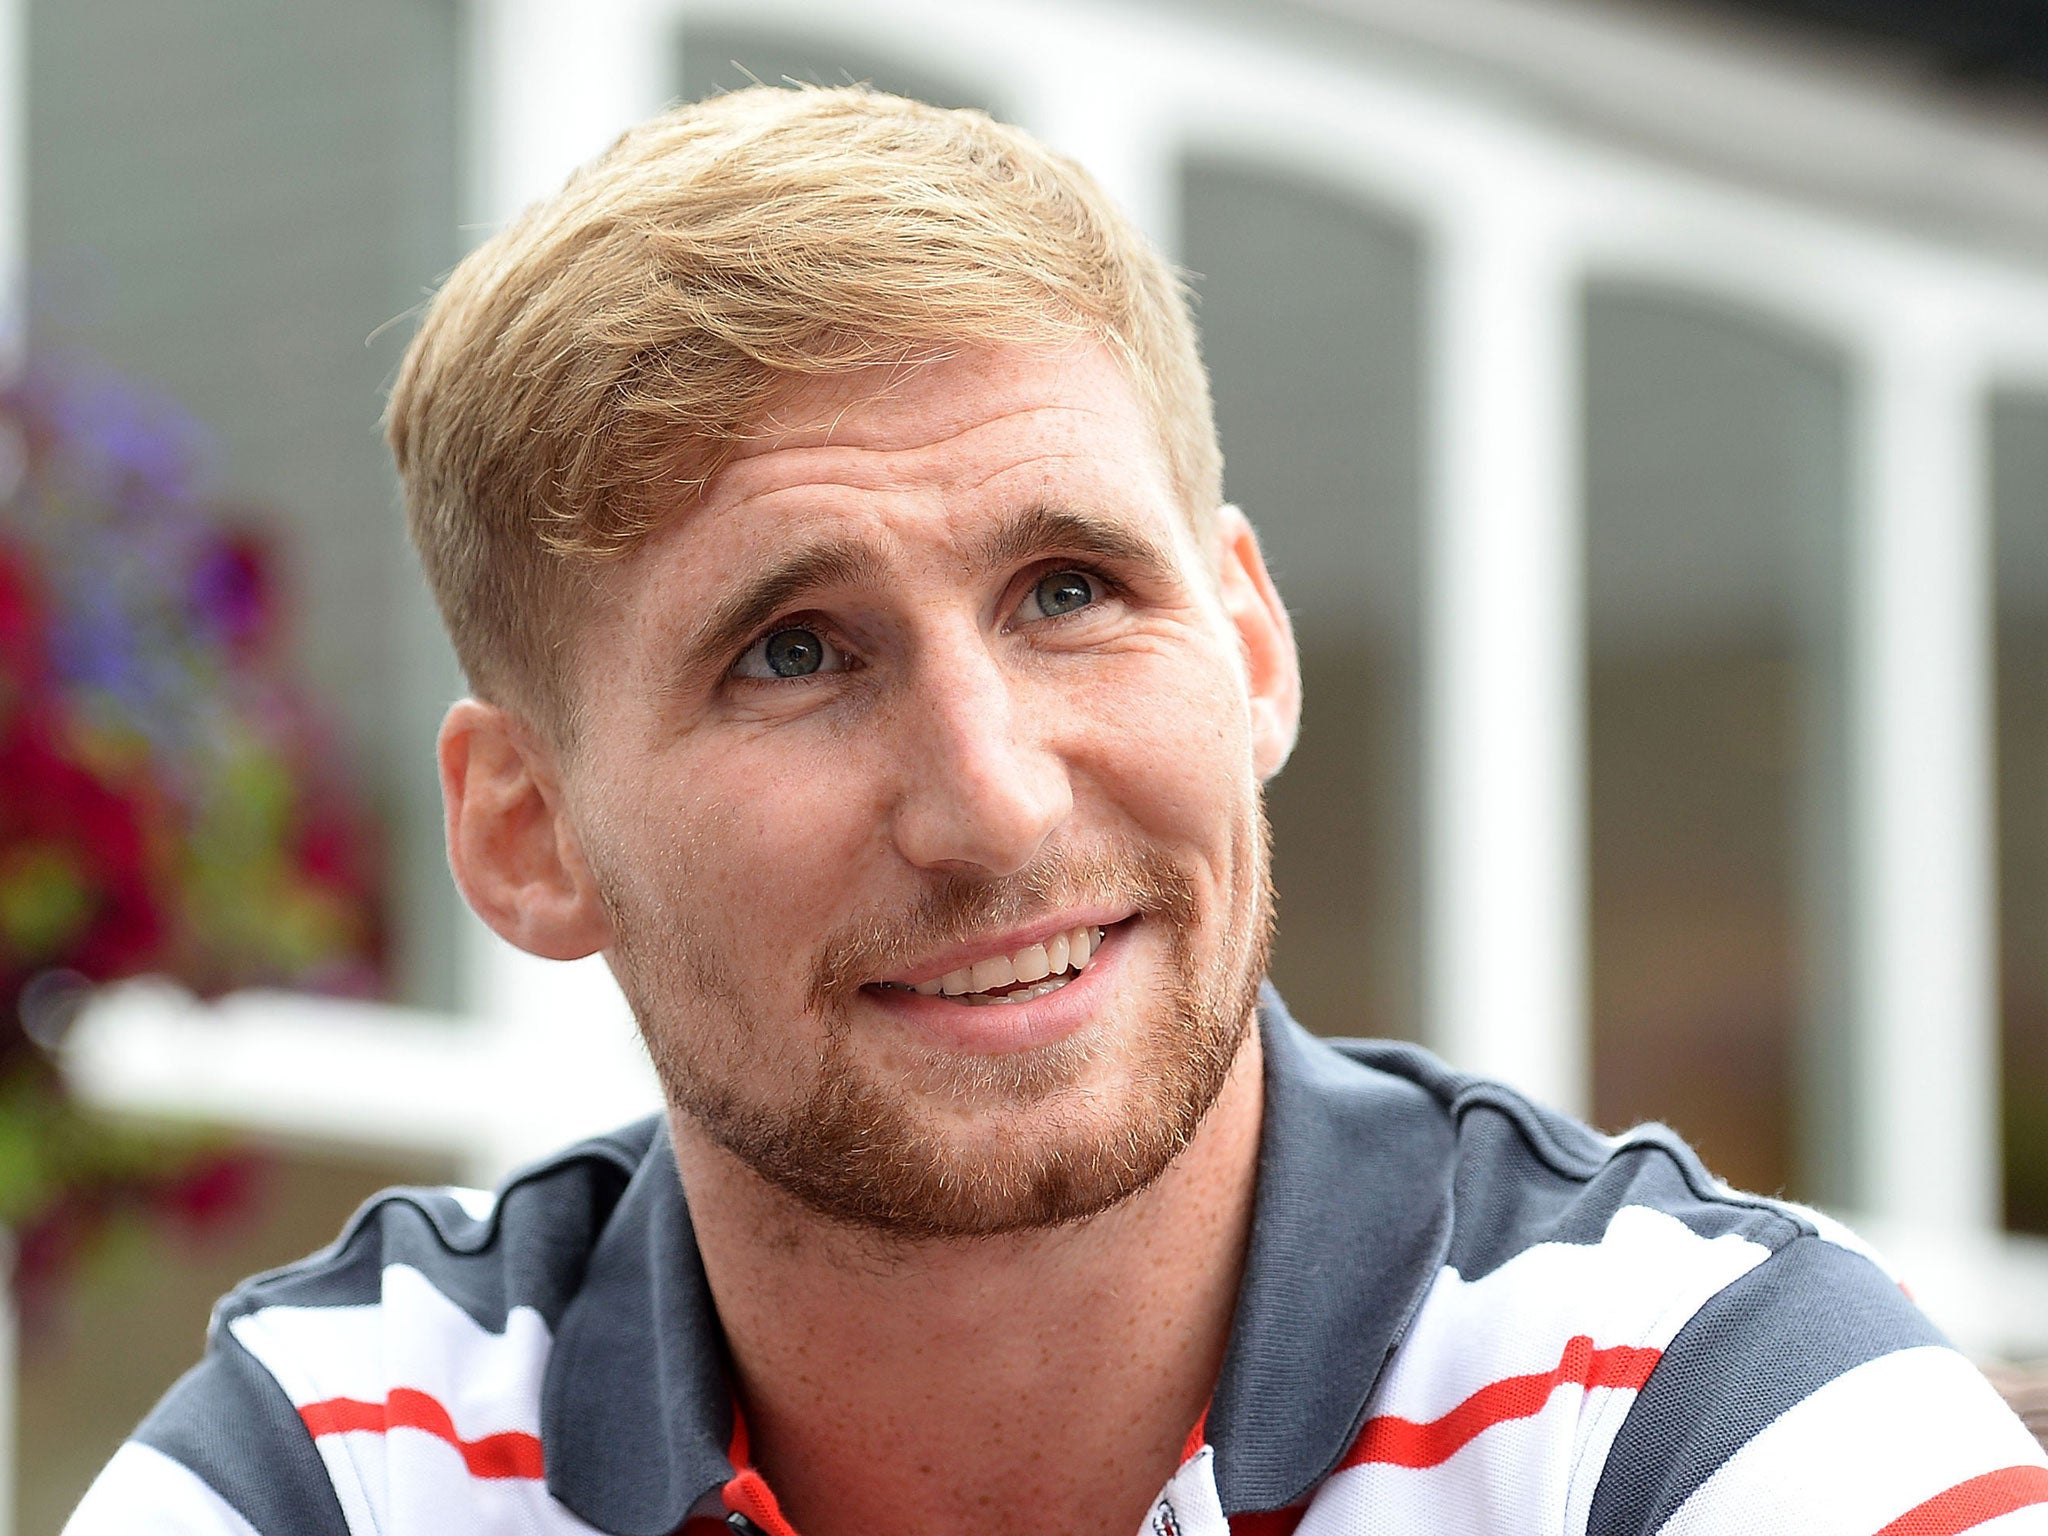 Wigan's Sam Tomkins is the short-priced favourite to win the Lance Todd Trophy as man of the match